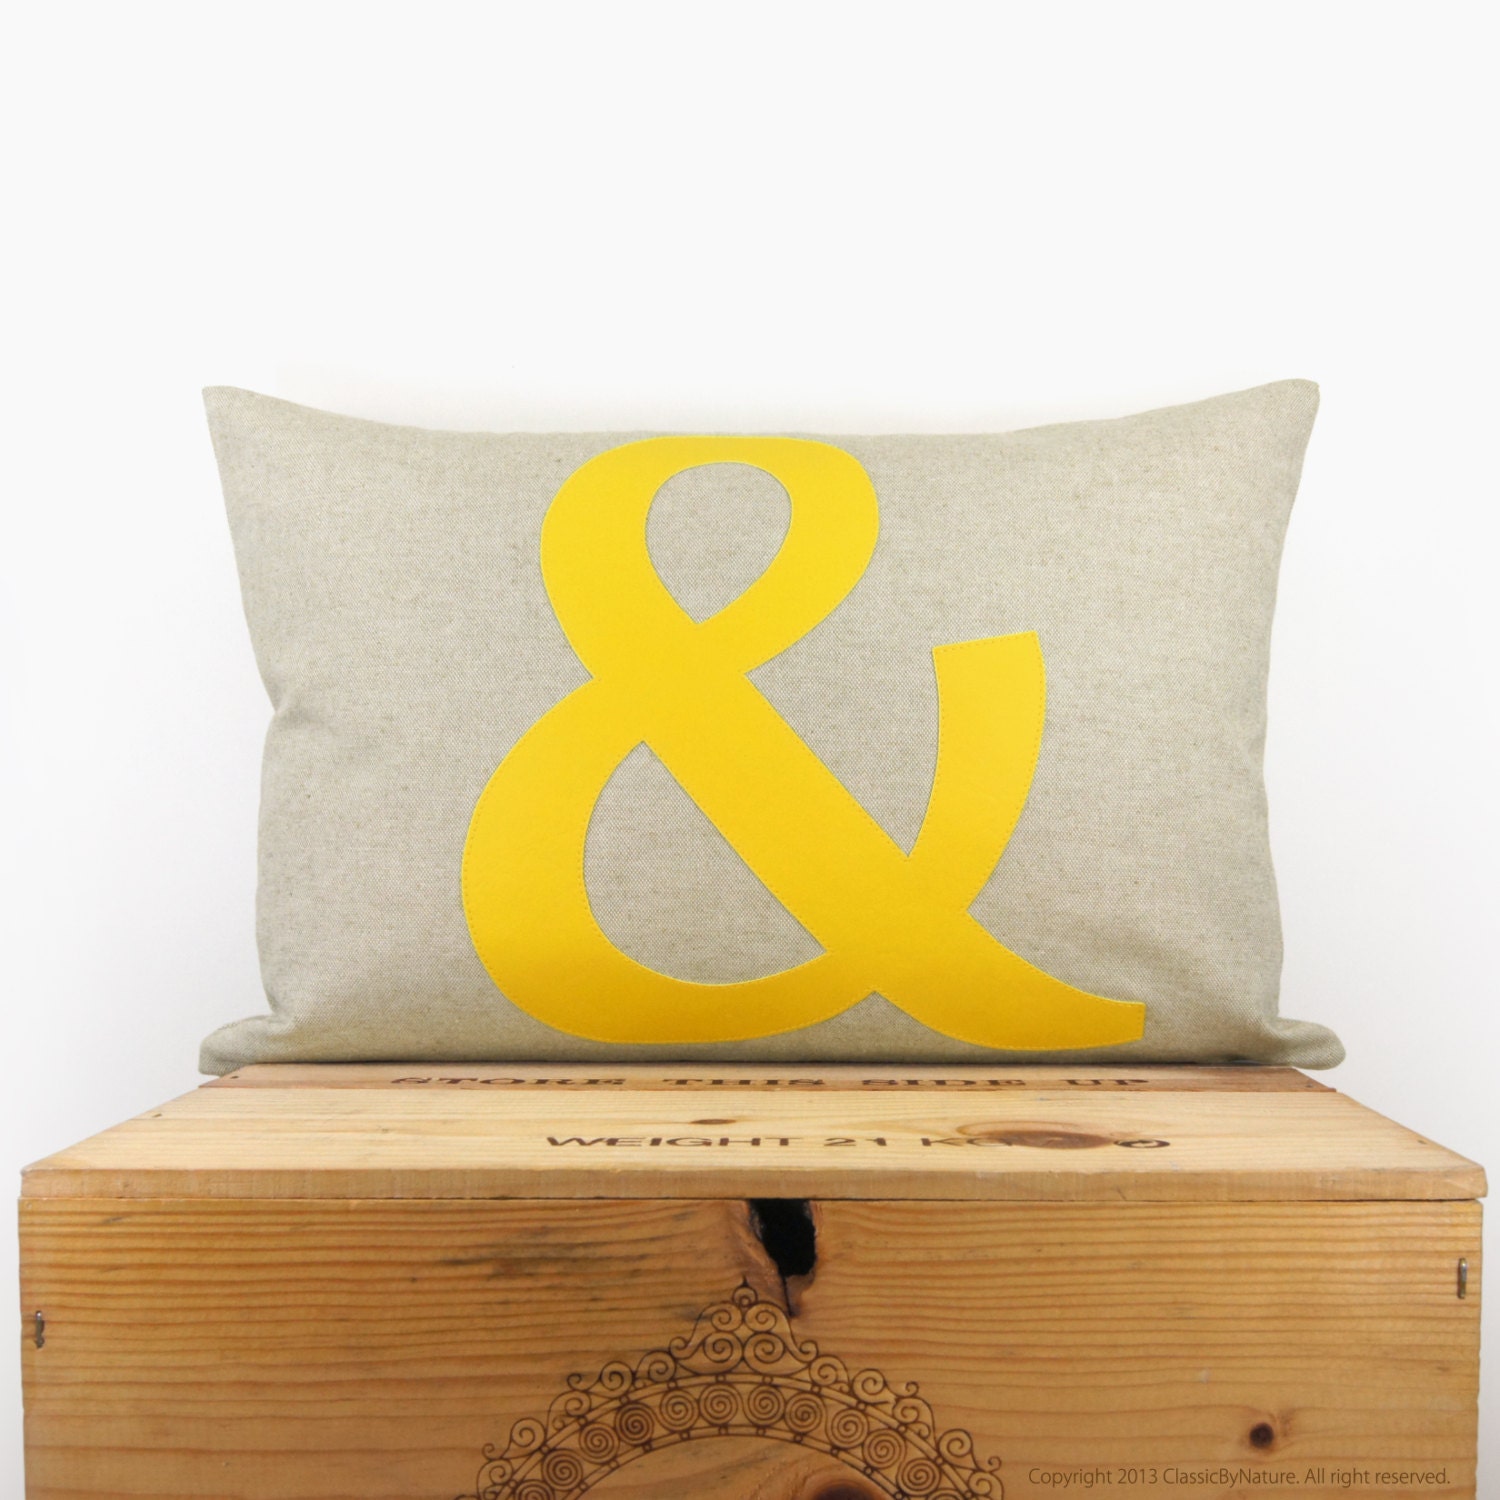 Ampersand pillow - Monogram -Typography Letter - Ampersand applique in yellow and natural beige - 12x18 lumbar pillow cover - ClassicByNature